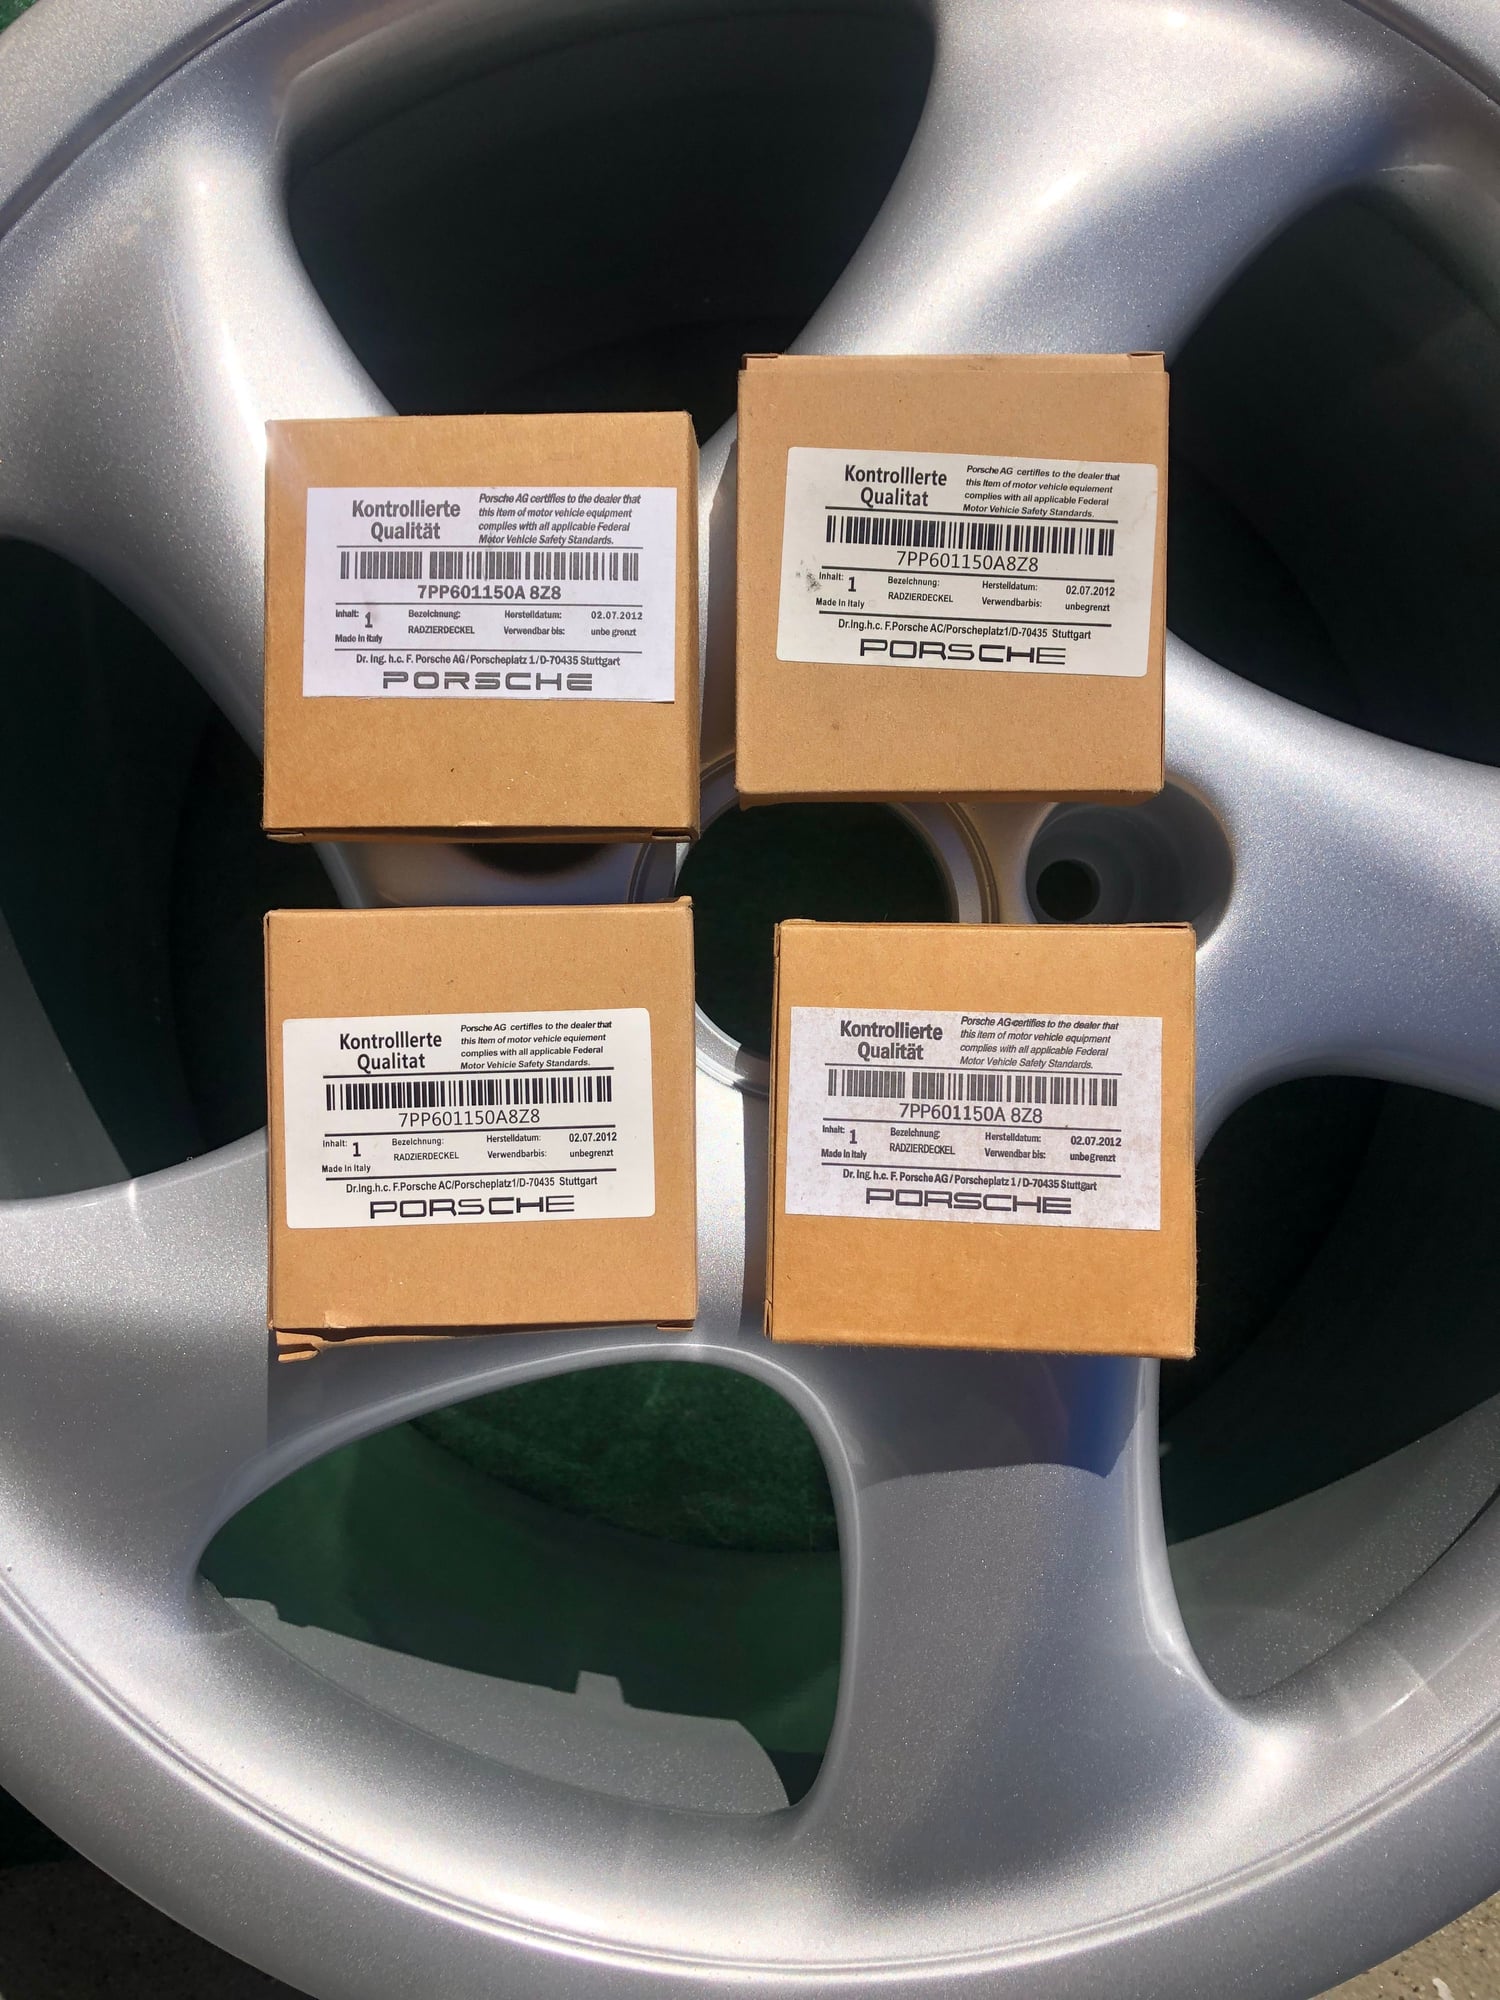 Wheels and Tires/Axles - 993 18” x 7.5/10” Turbo Twists Hollow Spoke Wheels - Used - 1995 to 2004 Porsche 911 - Manhattan Beach, CA 90266, United States